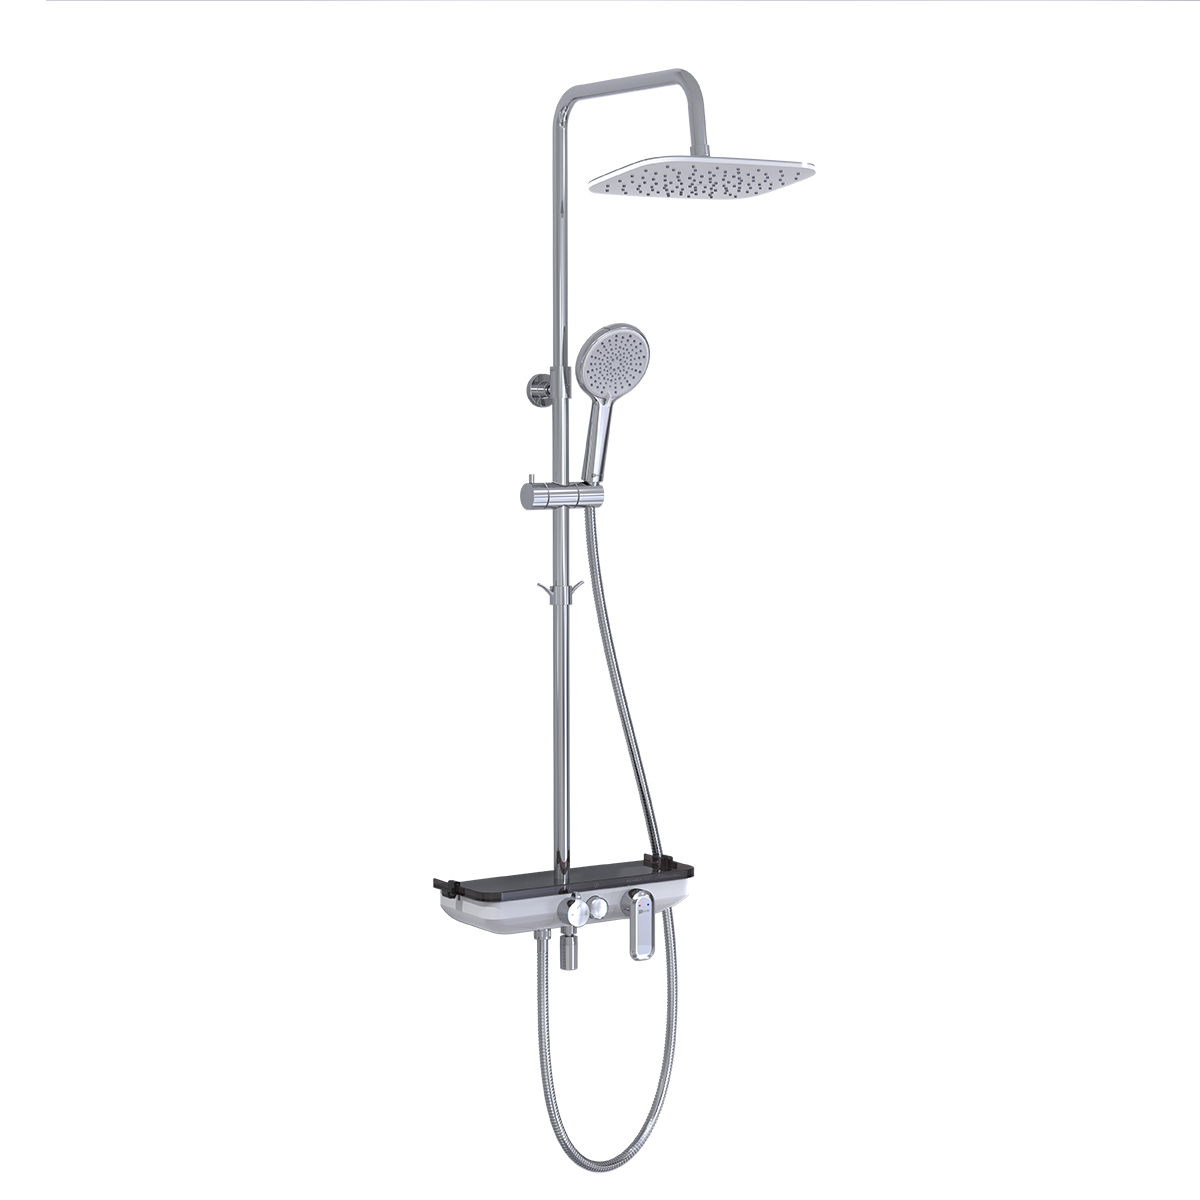 LM7012C Bath and shower faucet with adjustable rod height, swivel spout and «Tropical rain» shower head